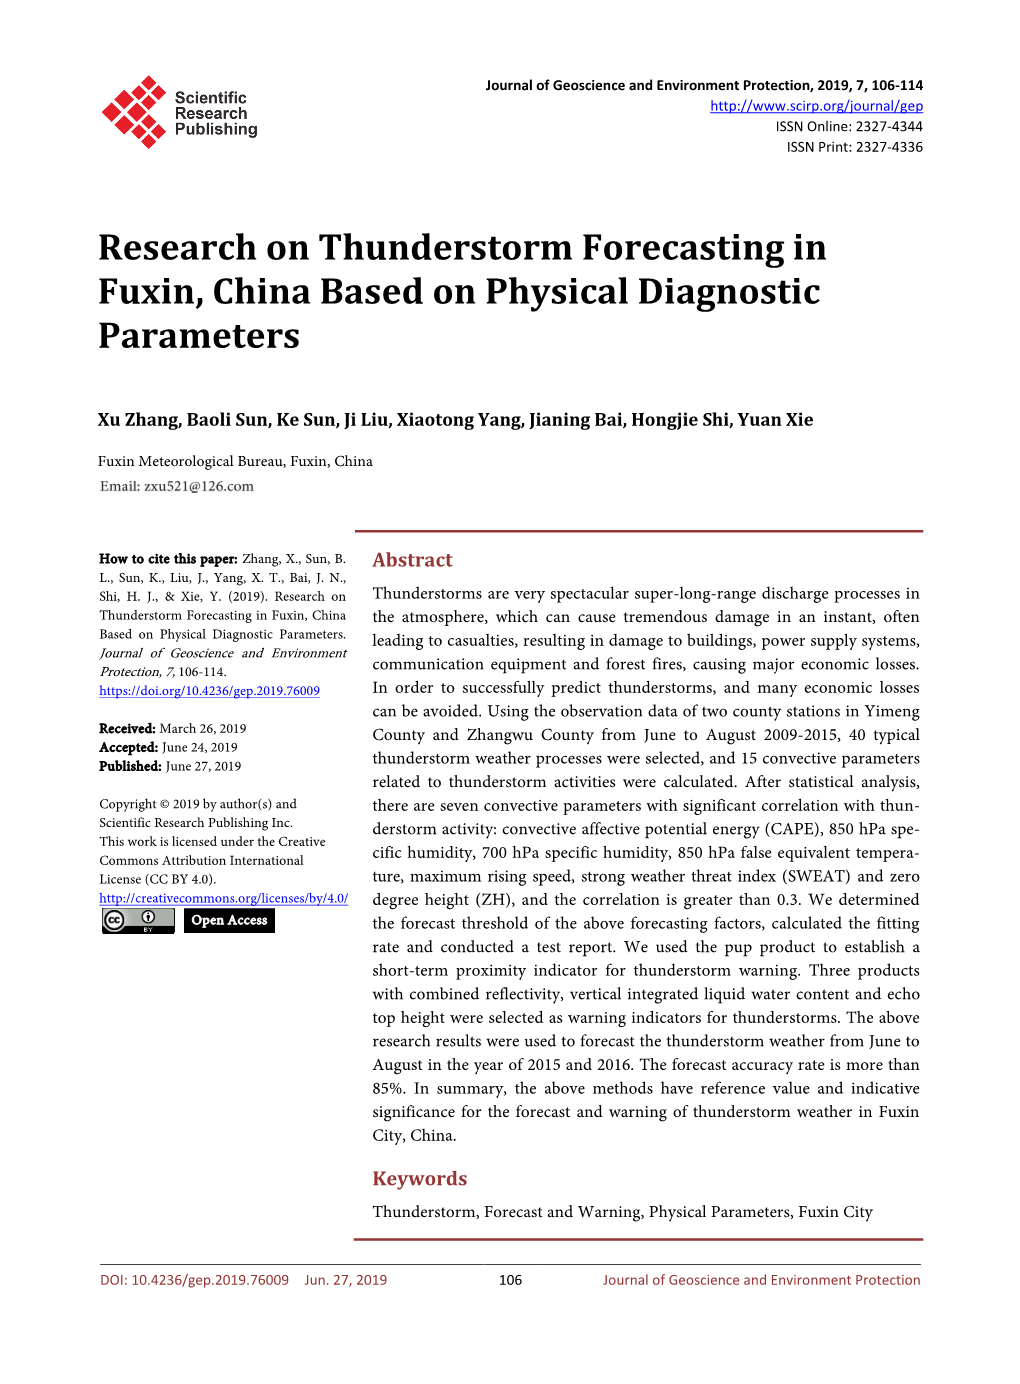 Research on Thunderstorm Forecasting in Fuxin, China Based on Physical Diagnostic Parameters